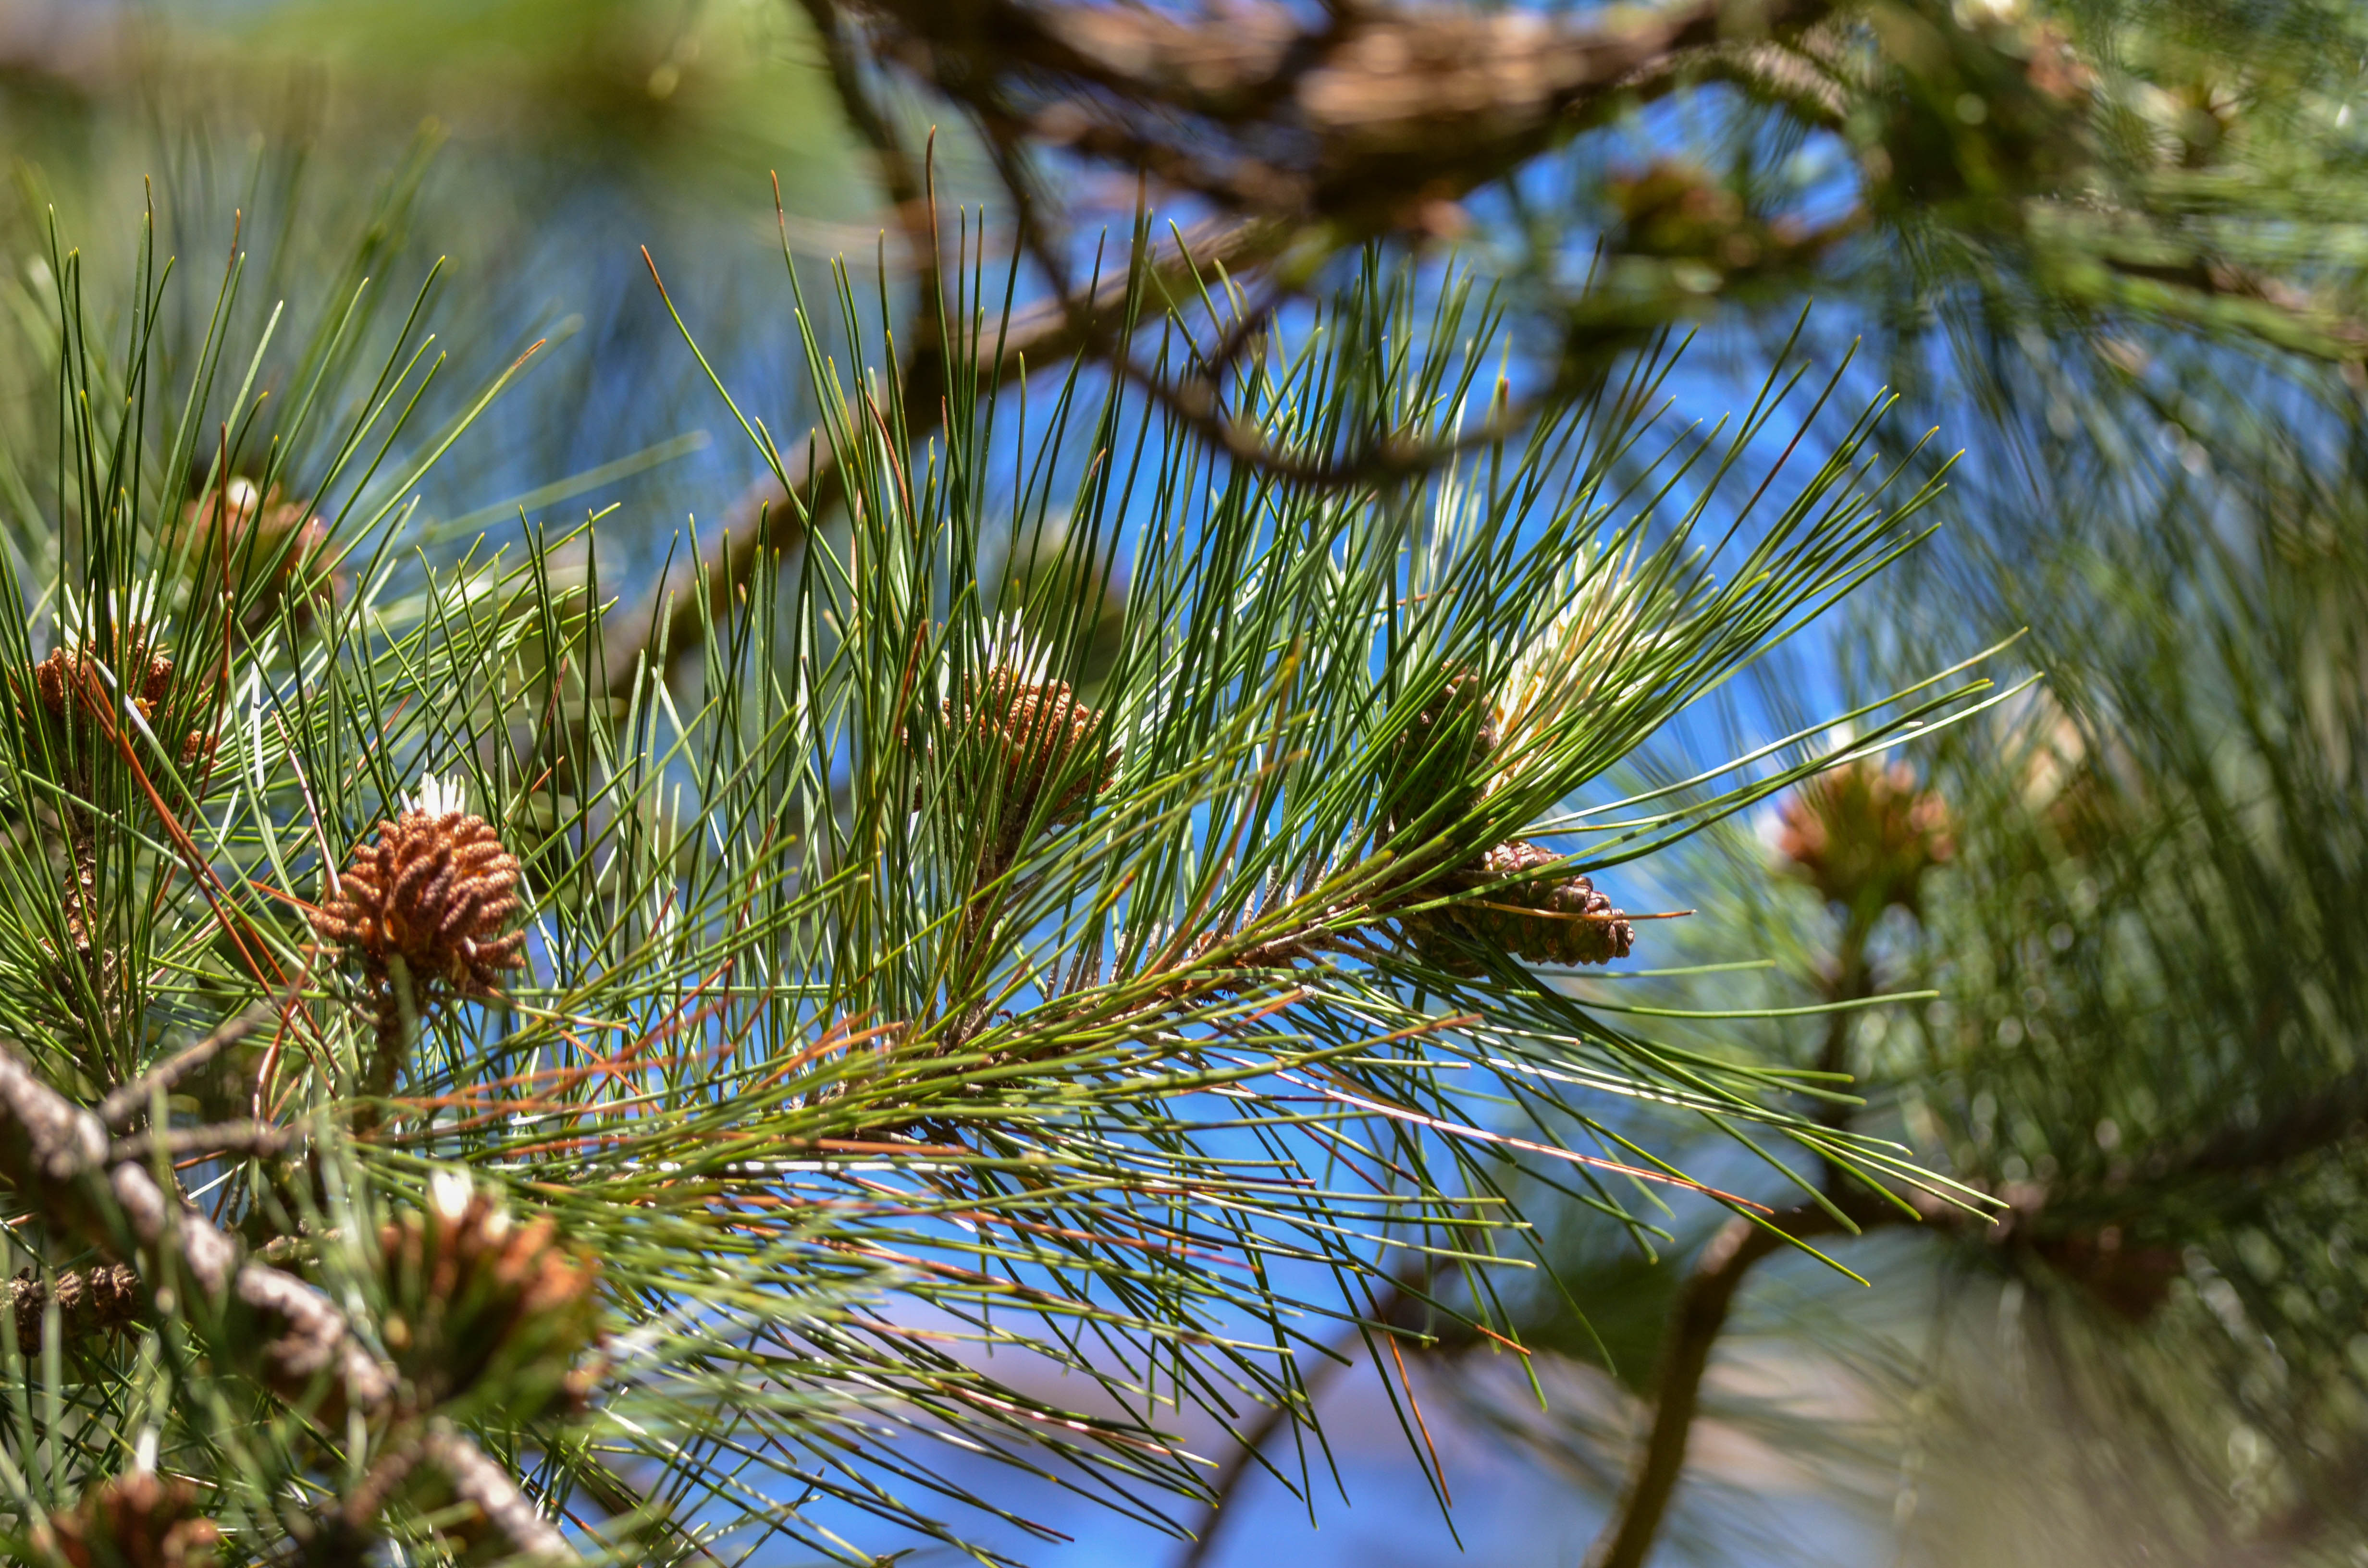 Bob St.Pierre on X: PINE CONE PONDERING Tonight's dog run left me  considering the variety of ways plants spread their seed. From pine cones  to maple helicopters to oak acorns to milkweed